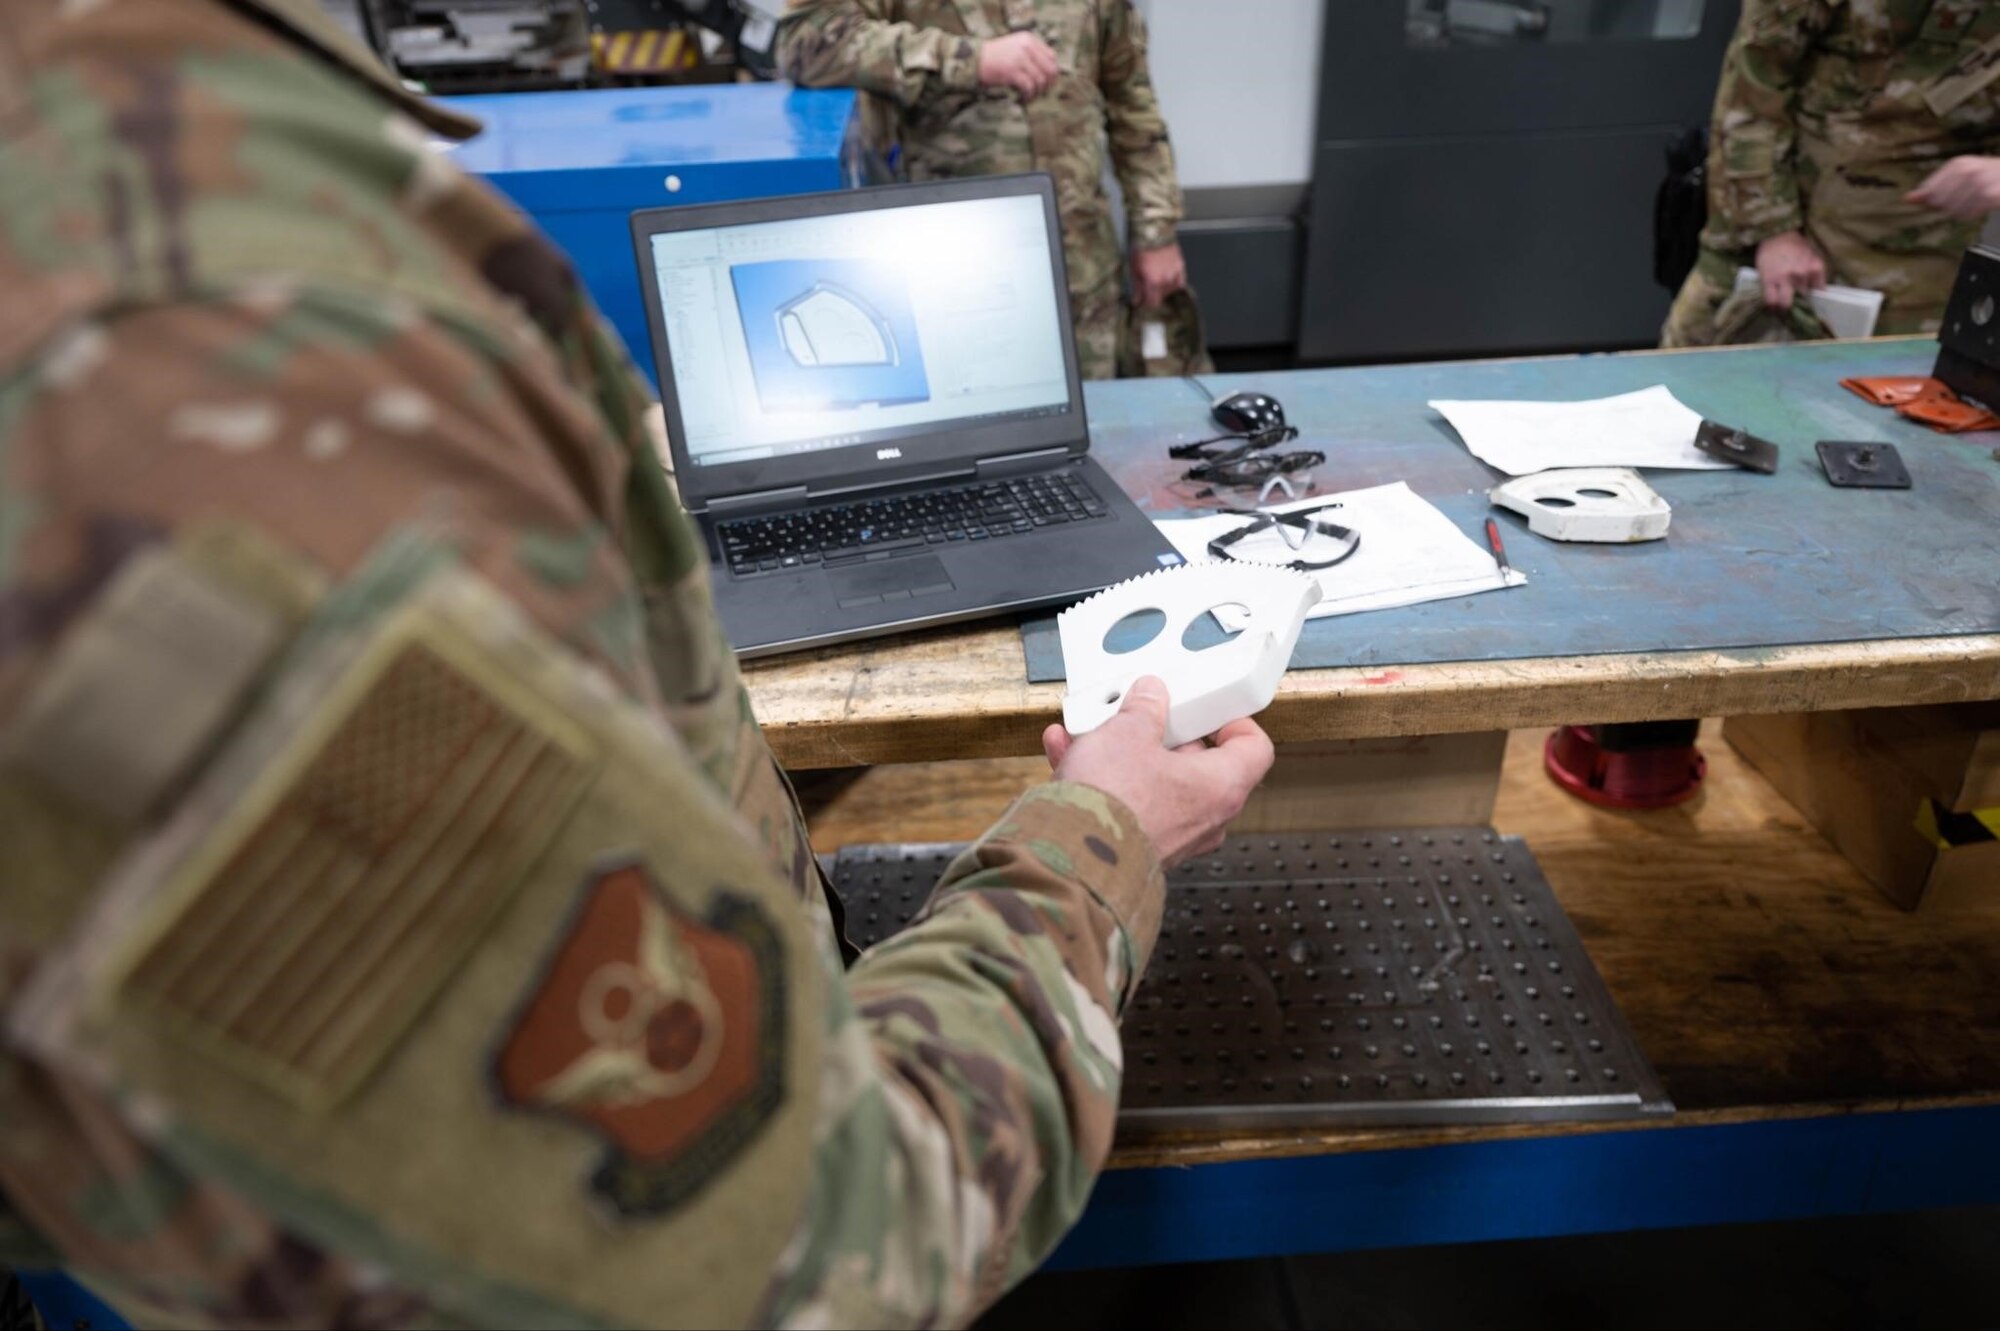 Maj. Gen. Mark Weatherington, the 8th Air Force and Joint-Global Strike Operations Center commander, inspects a 3D printed B-1B Lancer part during his visit to Ellsworth Air Force Base, S.D., May 4, 2021.